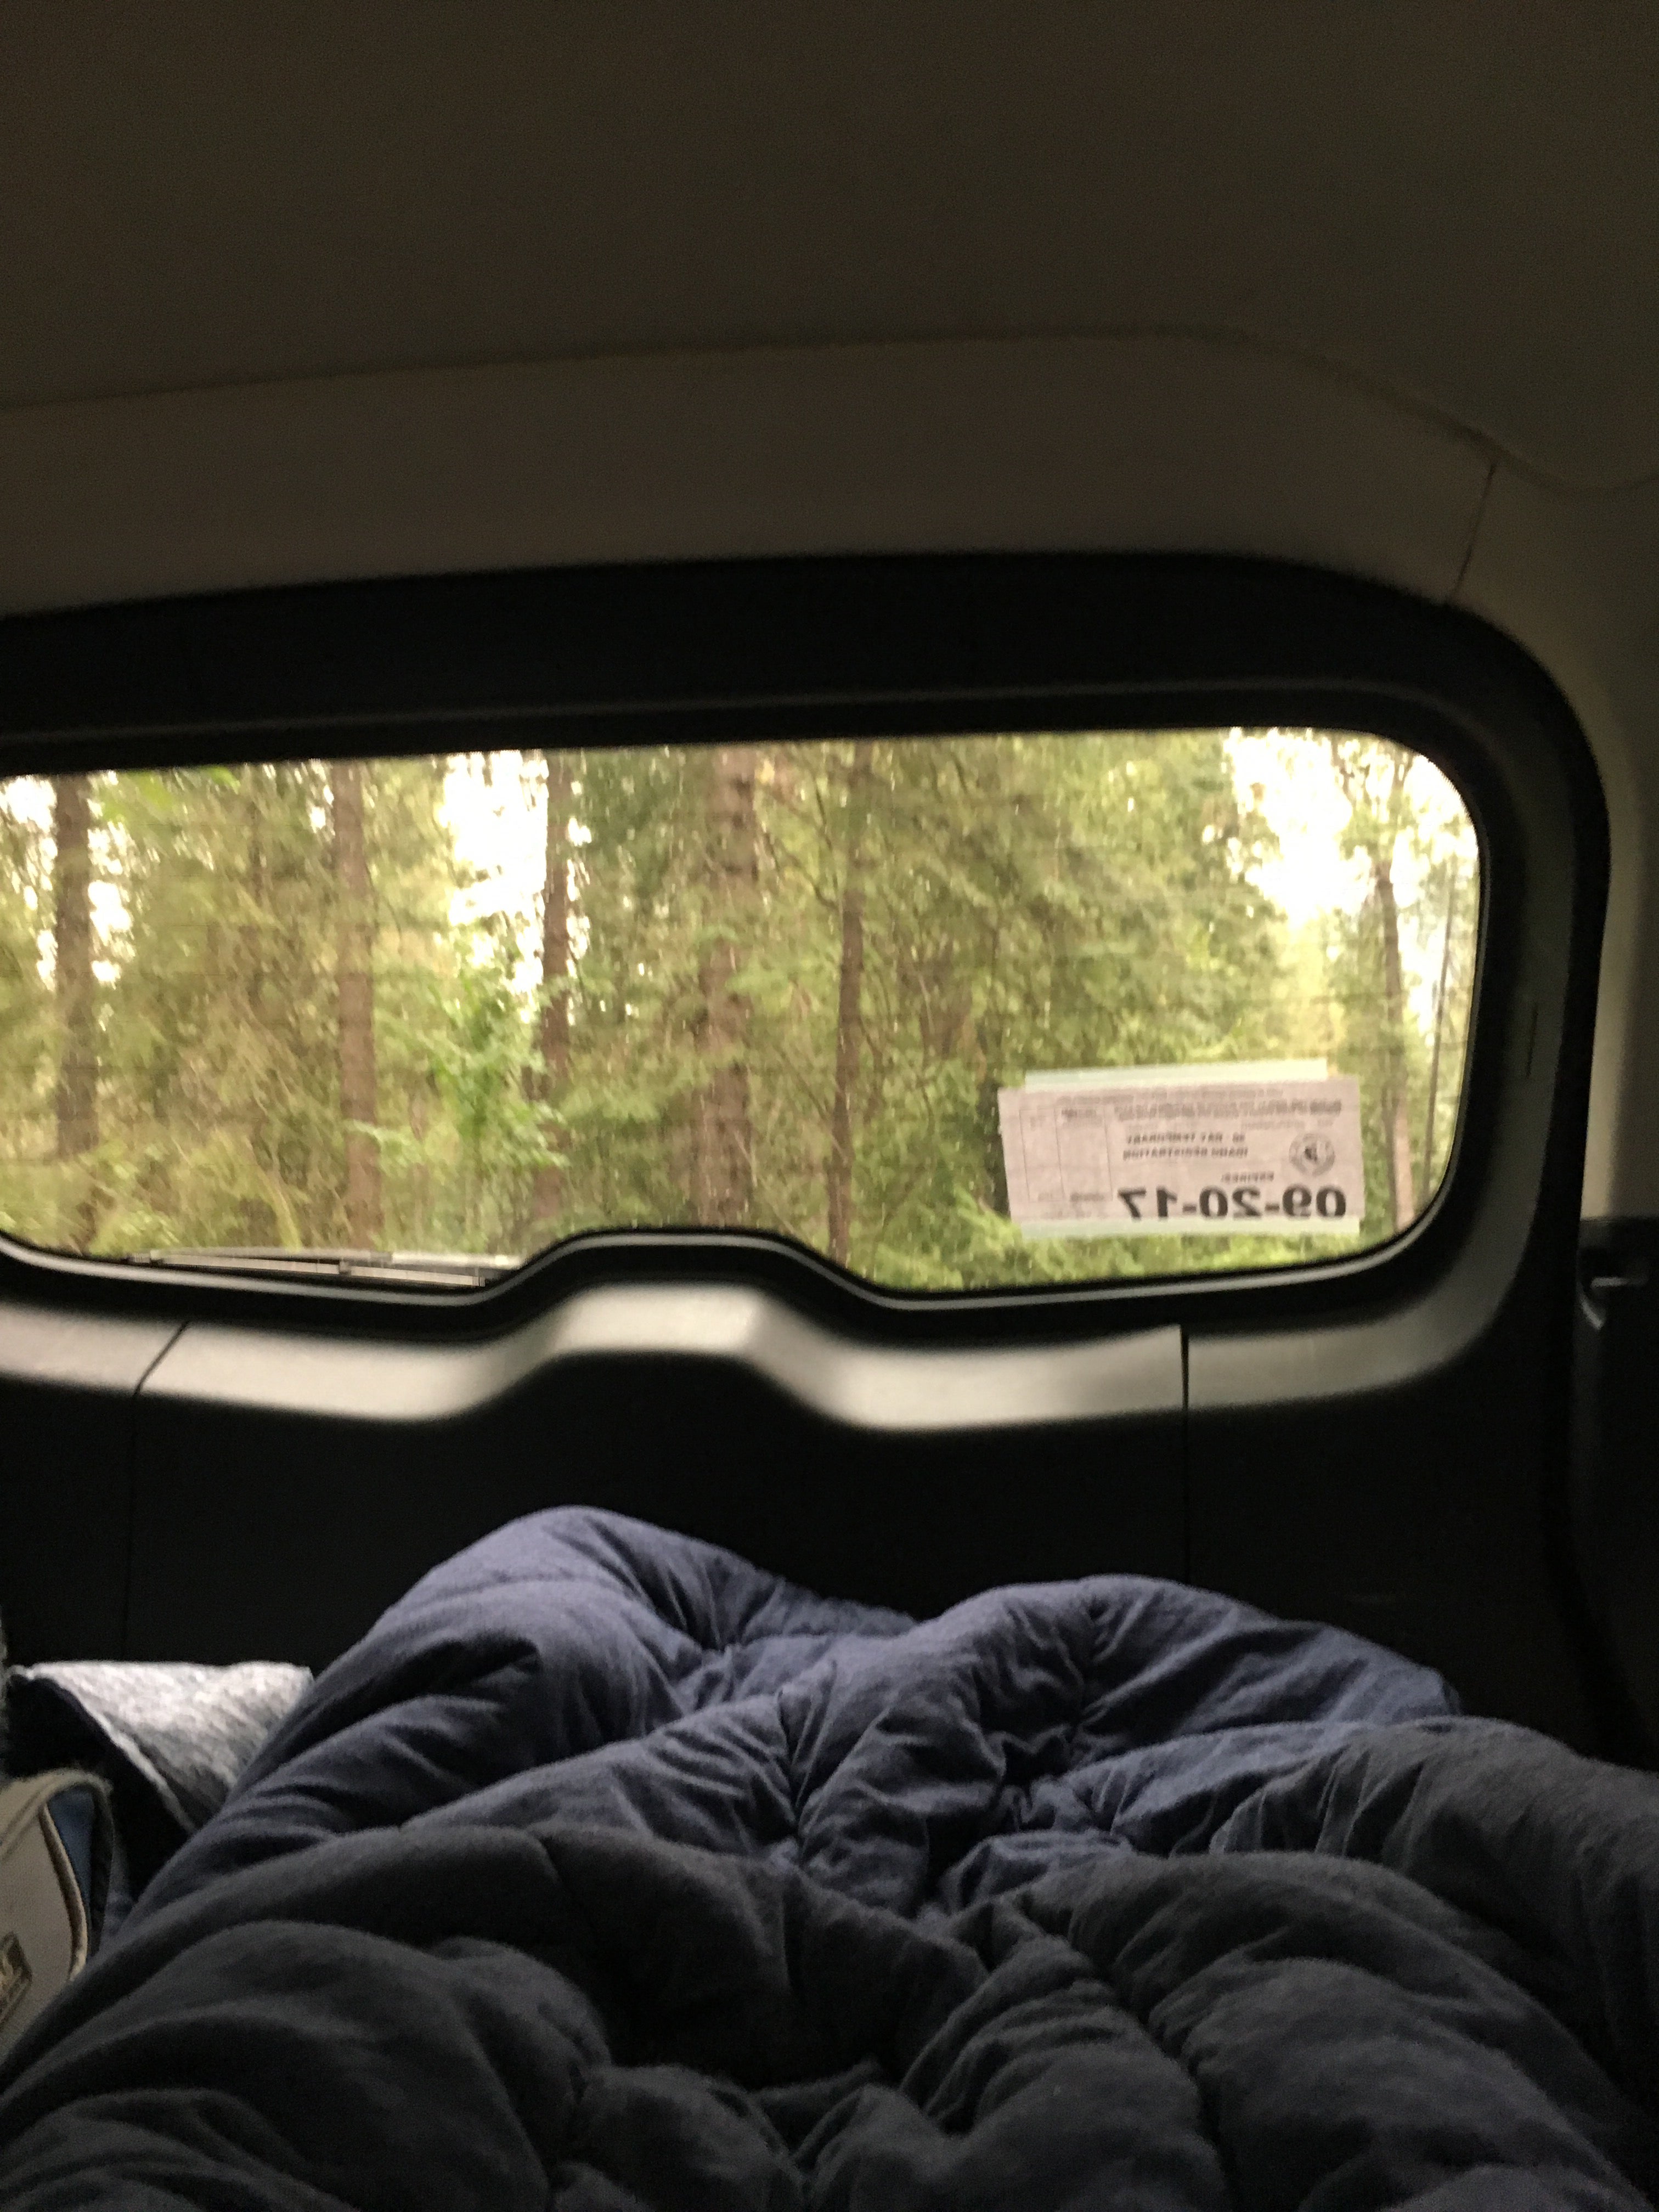 We slept in our van. This was our view in the morning. 